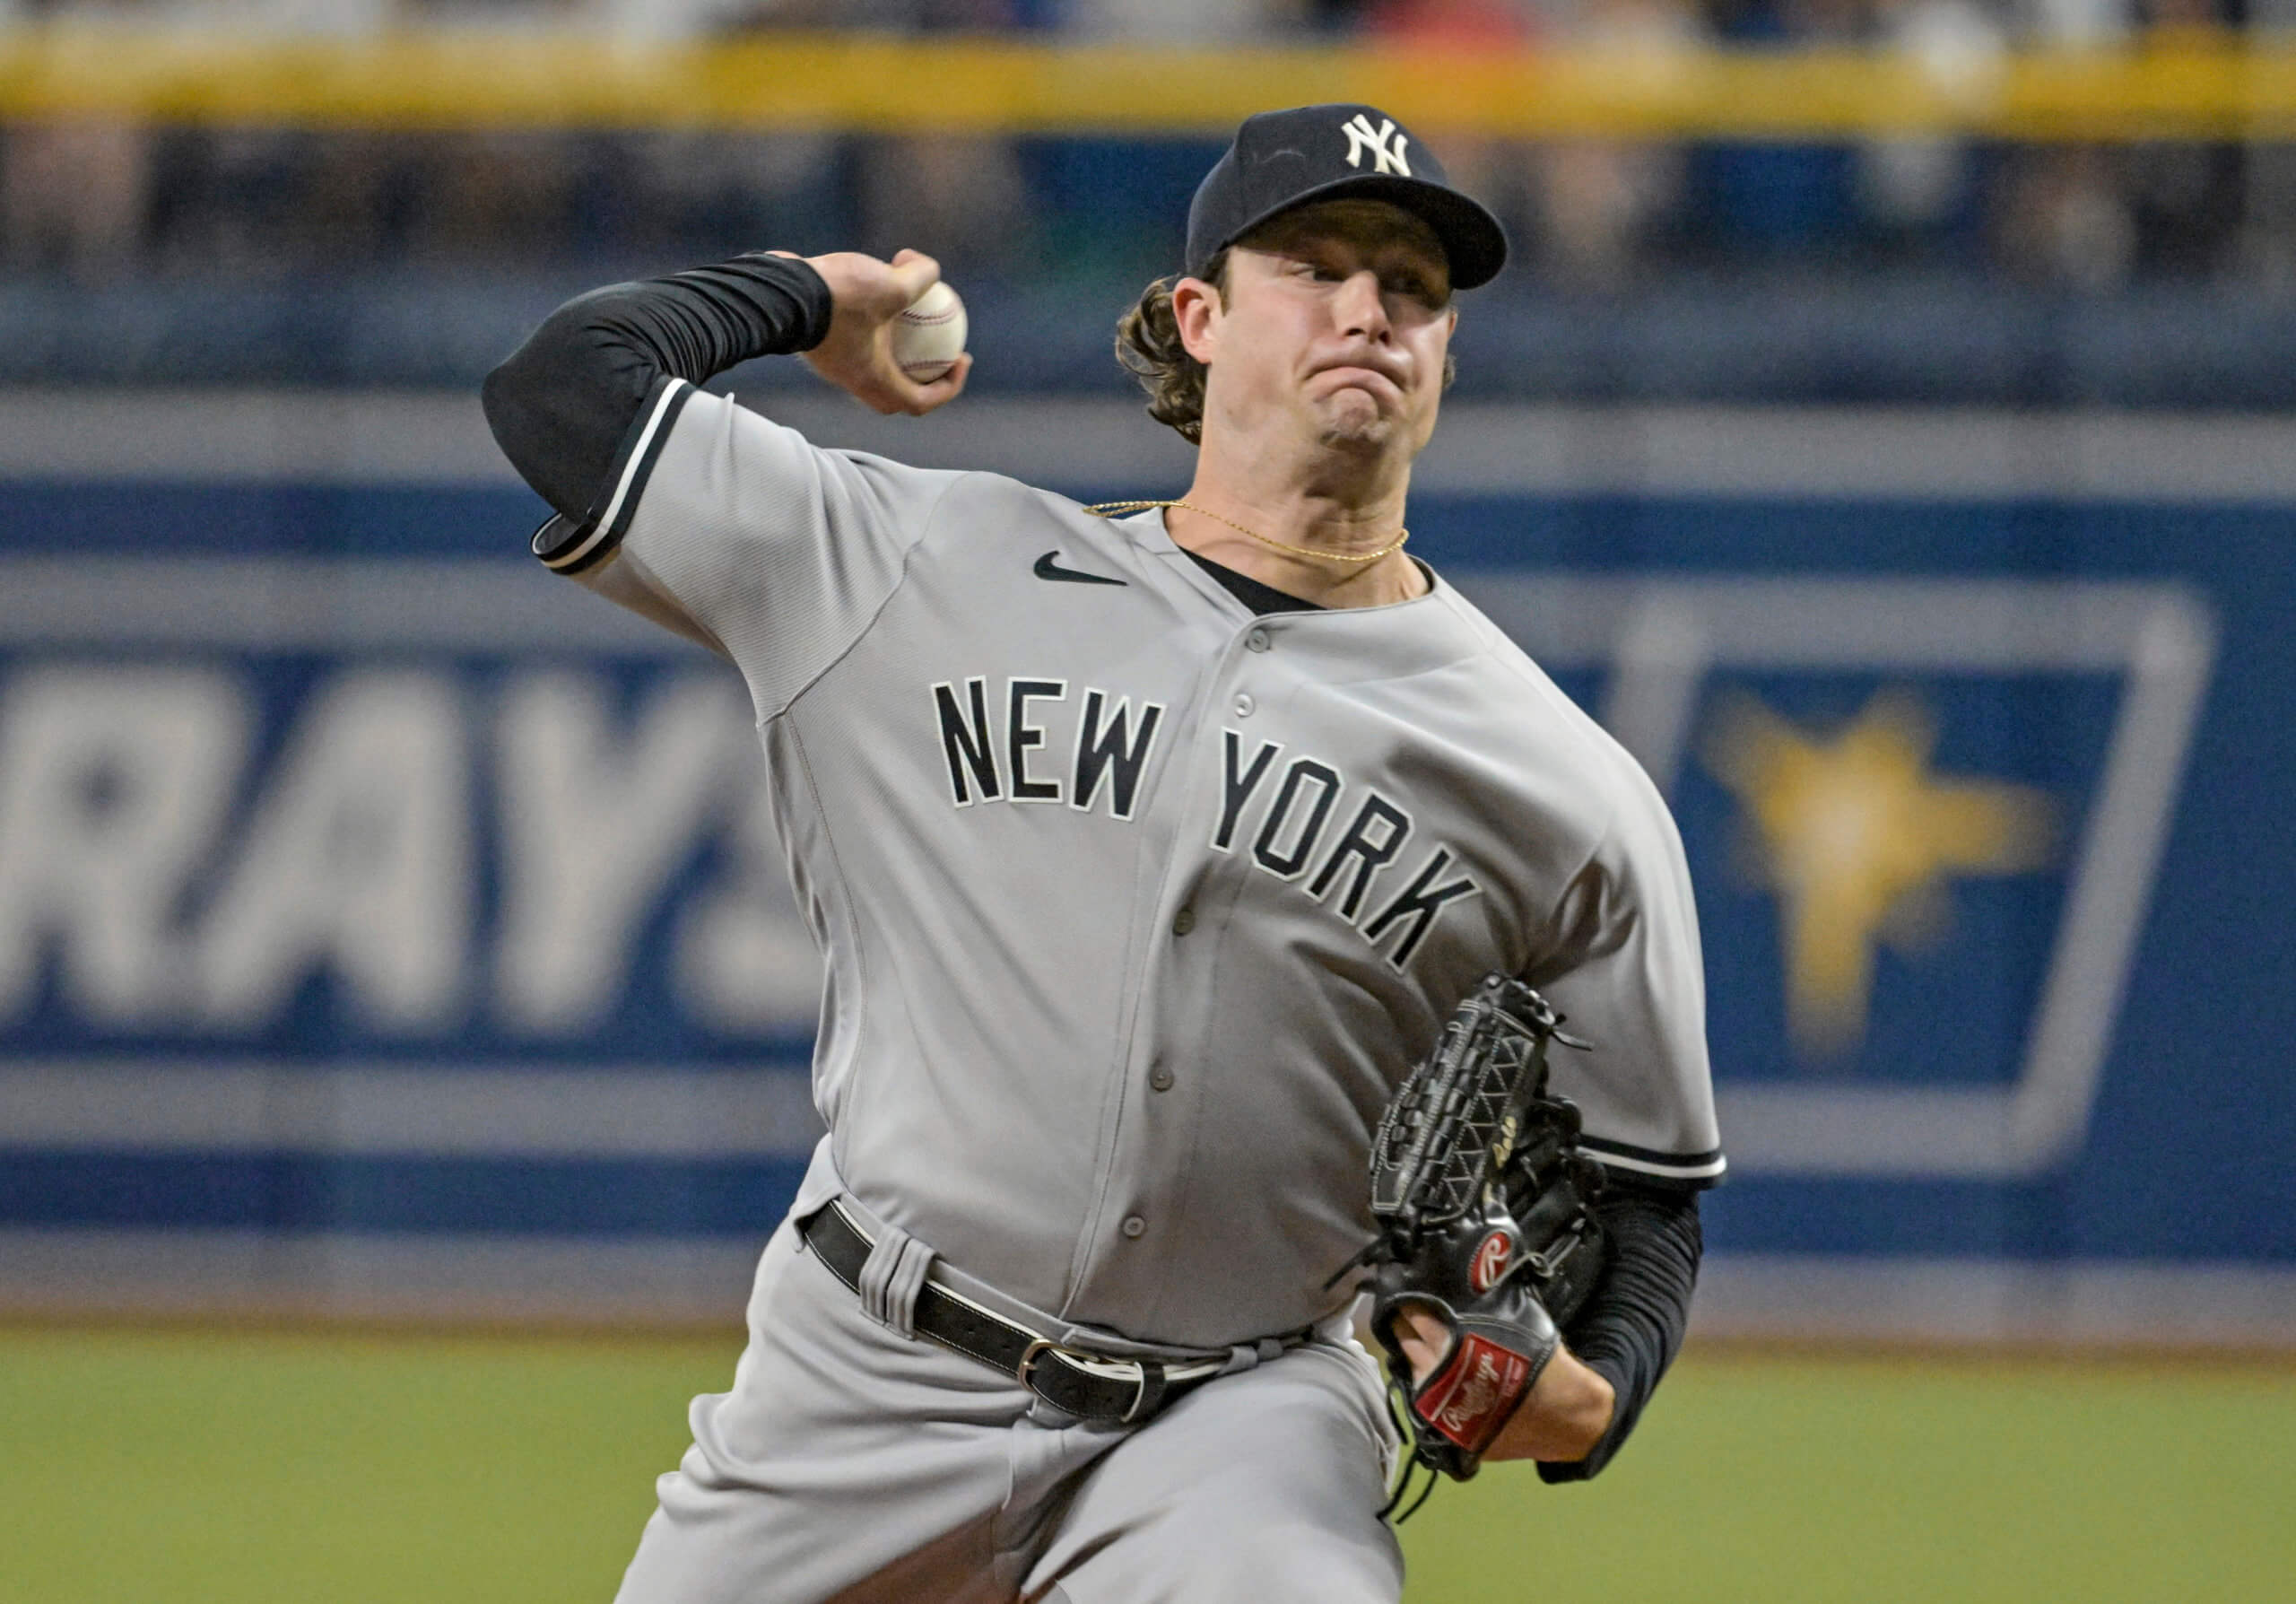 Gerrit Cole with Yankees to cut his hair for $ 324 million - Líder